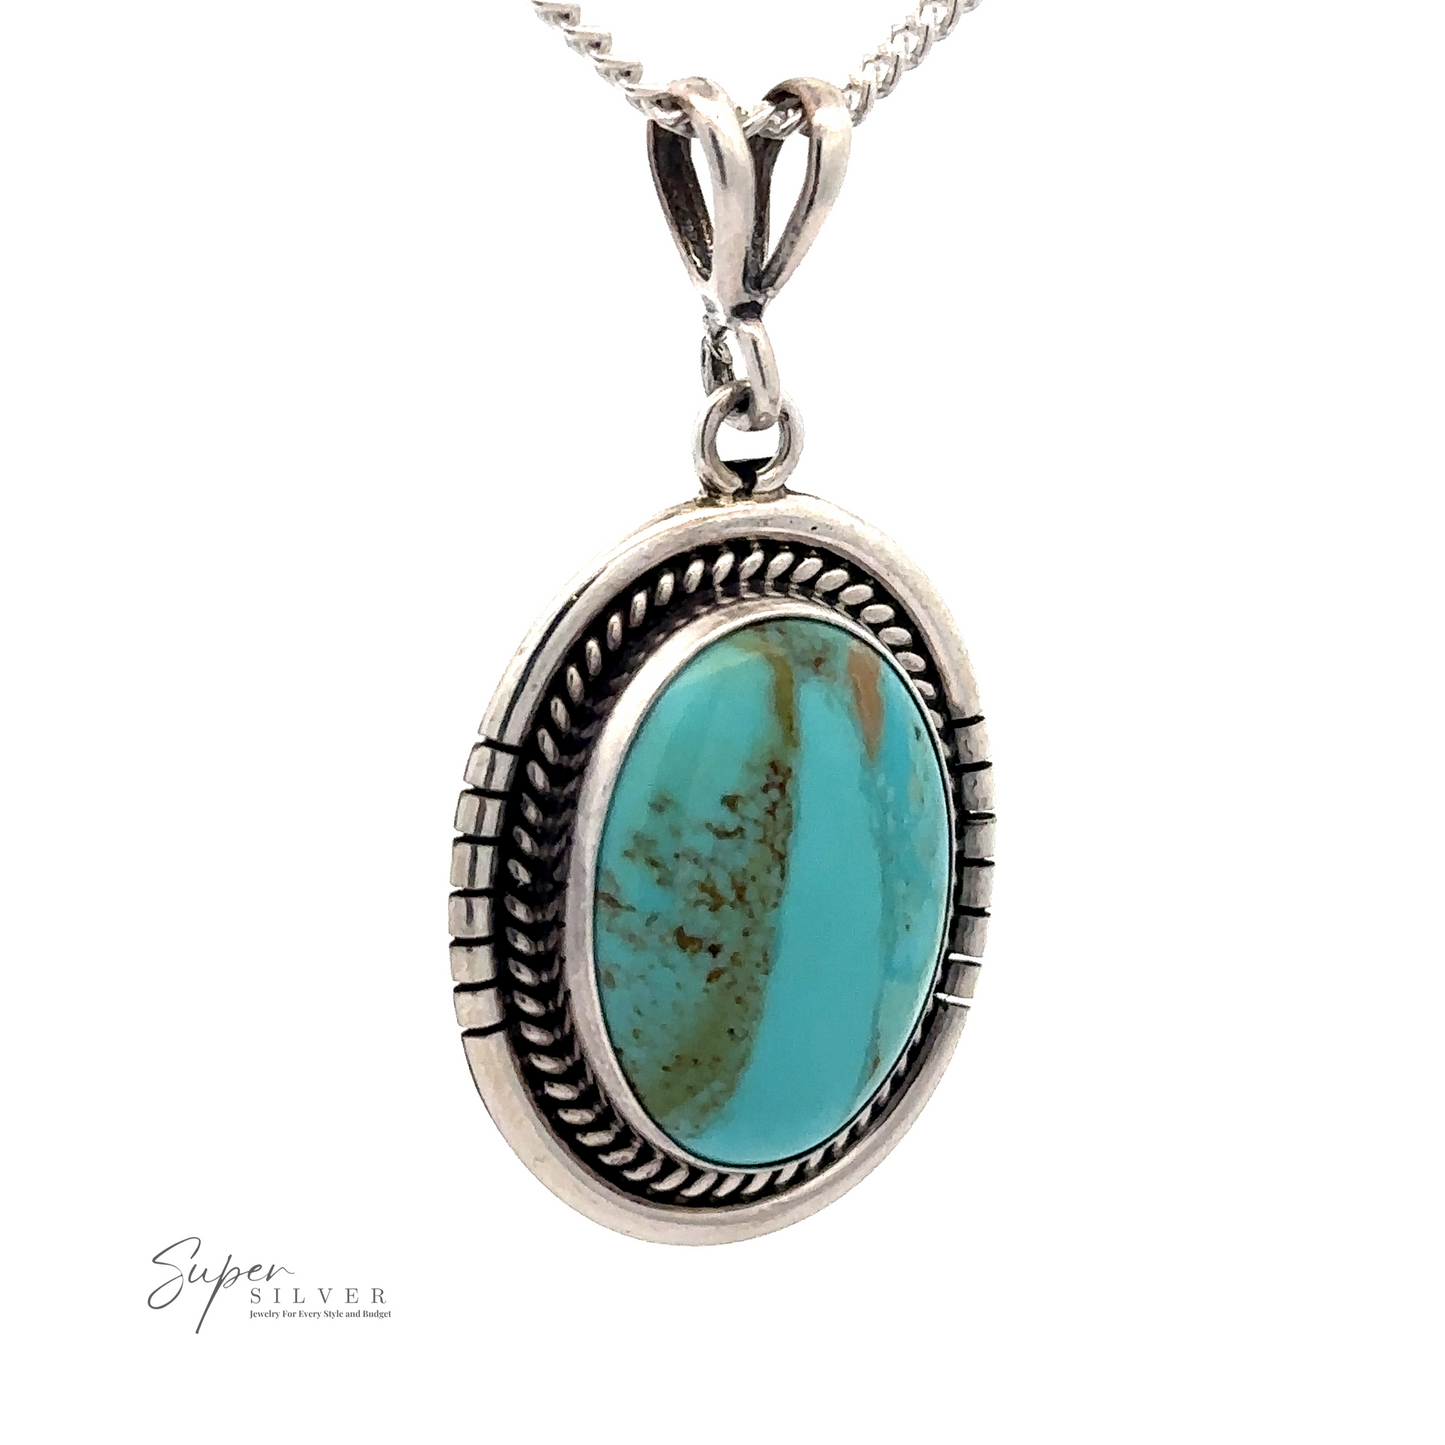 
                  
                    A stunning Native American Turquoise Oval Pendant featuring a large, oval turquoise stone set in an ornate bezel setting, hanging from a silver chain. The turquoise pendant showcases intricate detailing reminiscent of Native American craftsmanship.
                  
                